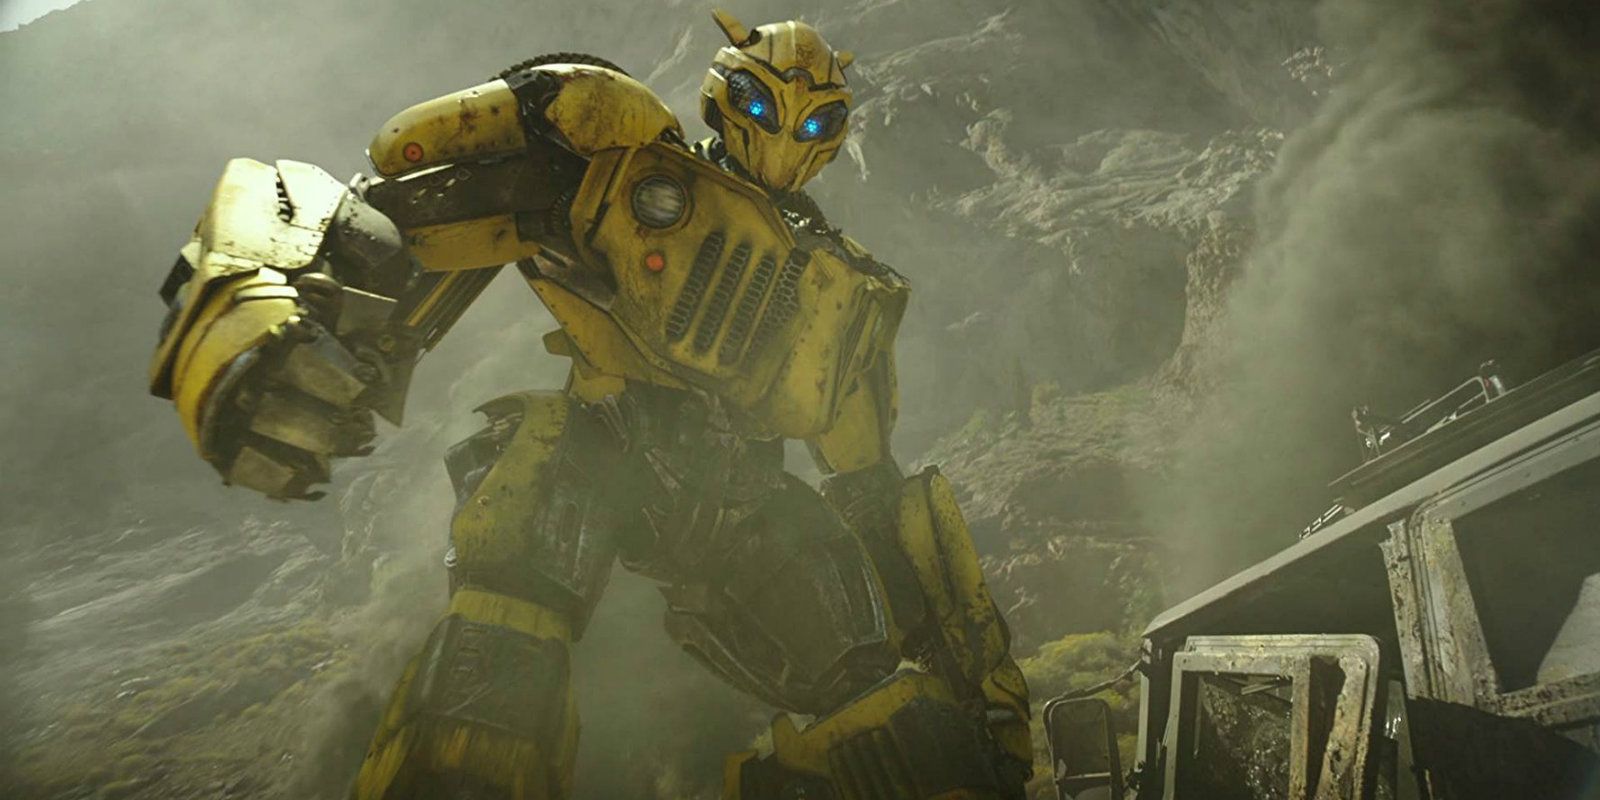 Transformers Bumblebee Movie Includes Fewer Decepticons